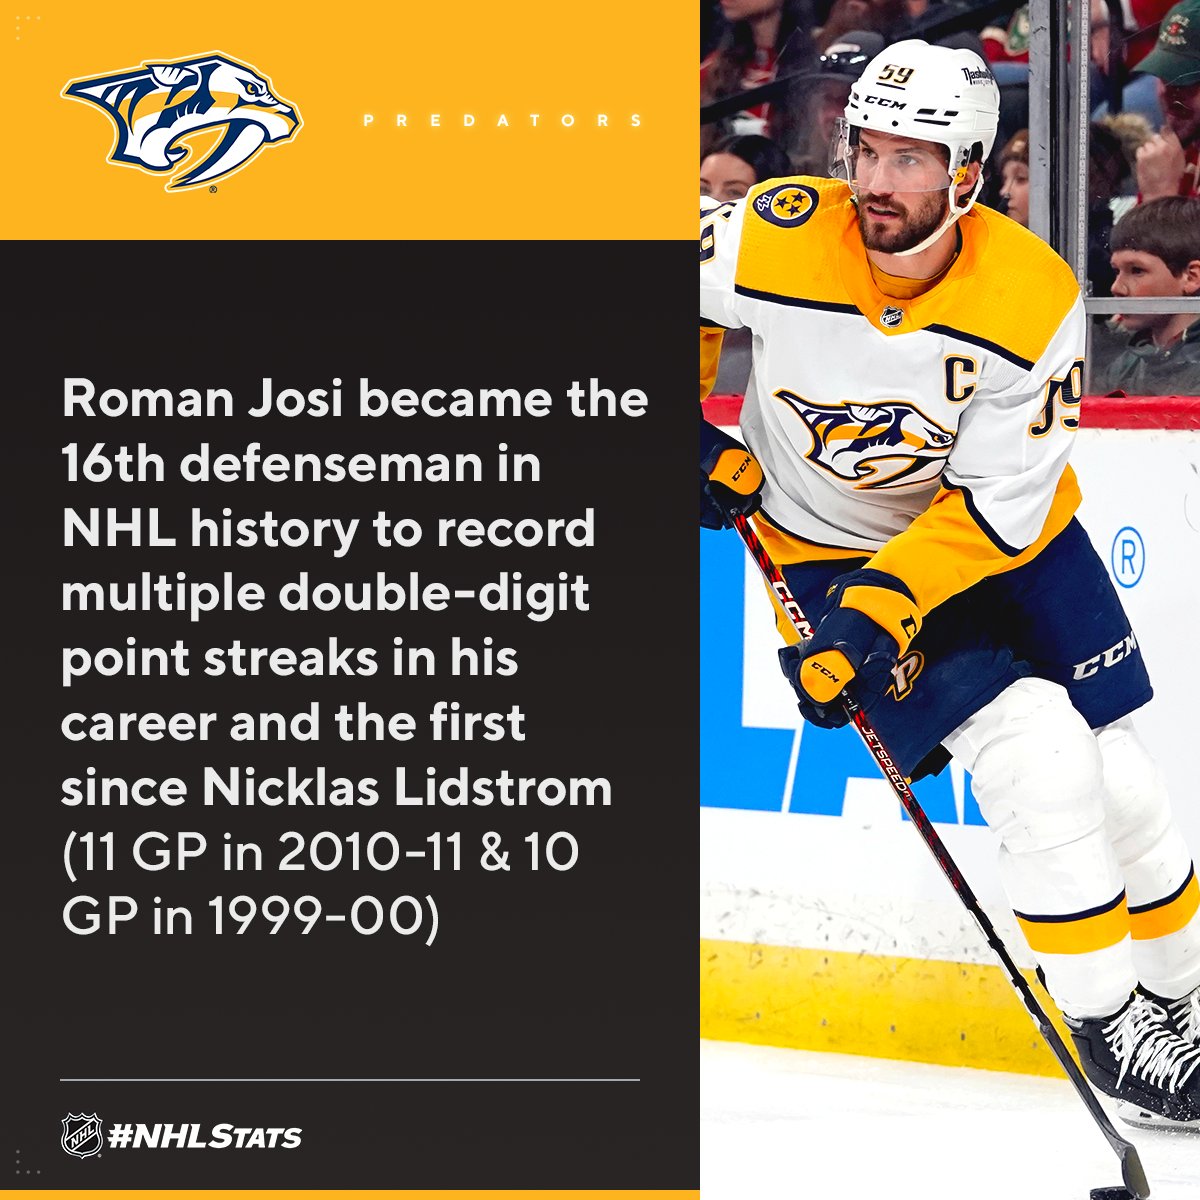 NHL Public Relations on X: With two assists in the first period of the # WinterClassic, Roman Josi extended his career-high point streak to 8 games  and became the first defenseman in @PredsNHL